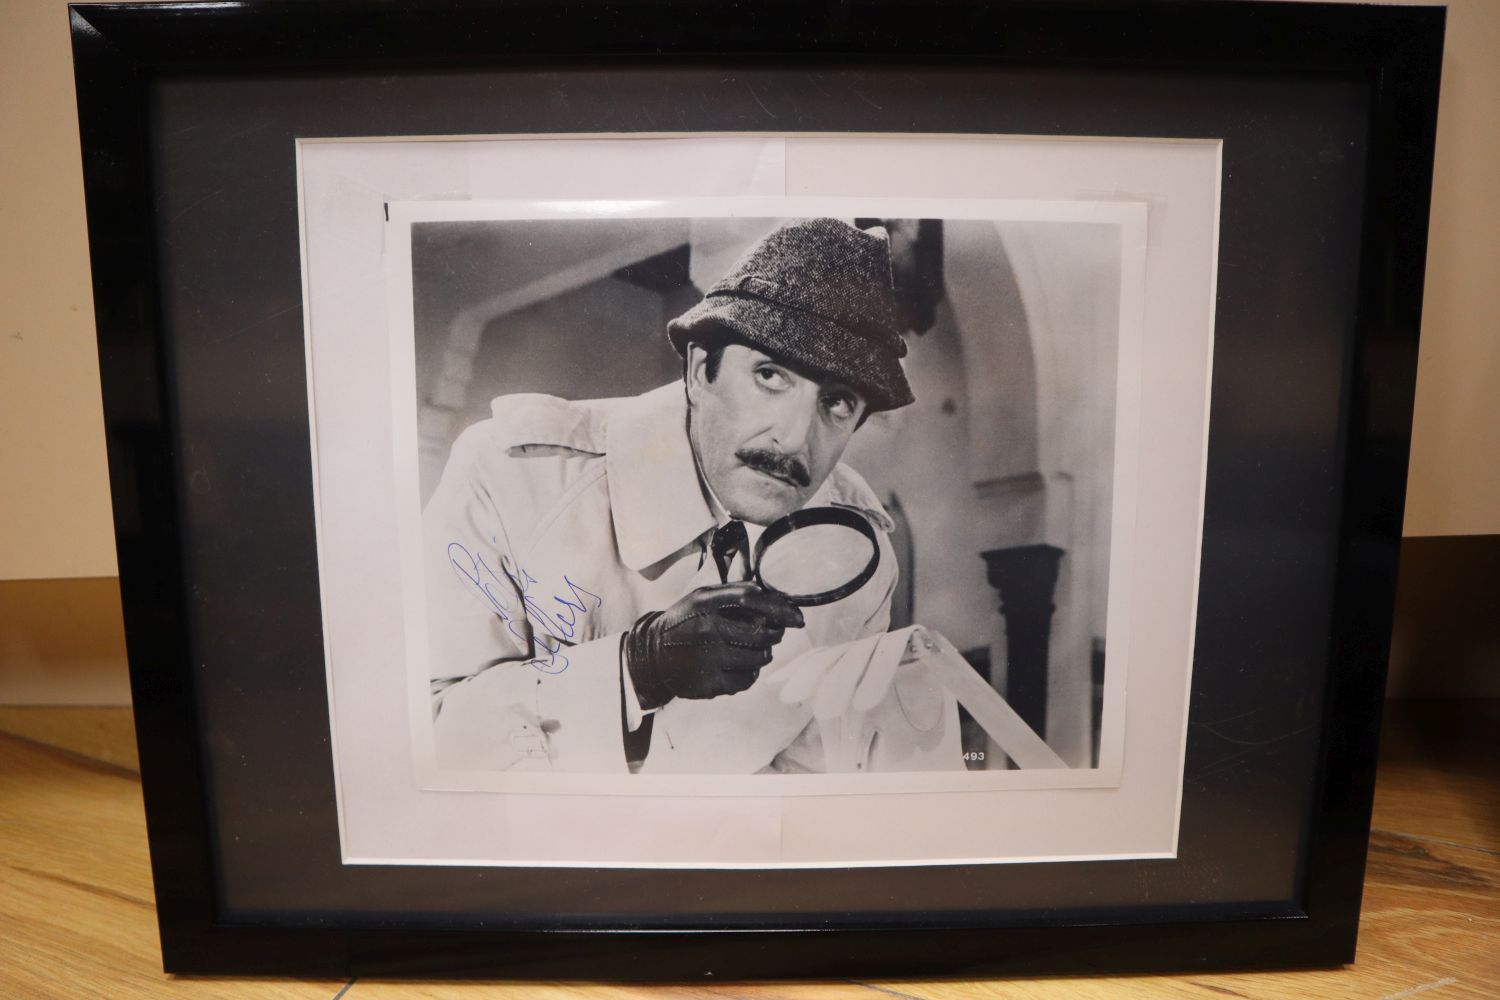 Peter Sellers, Inspector Clouseau, signed photograph, framed